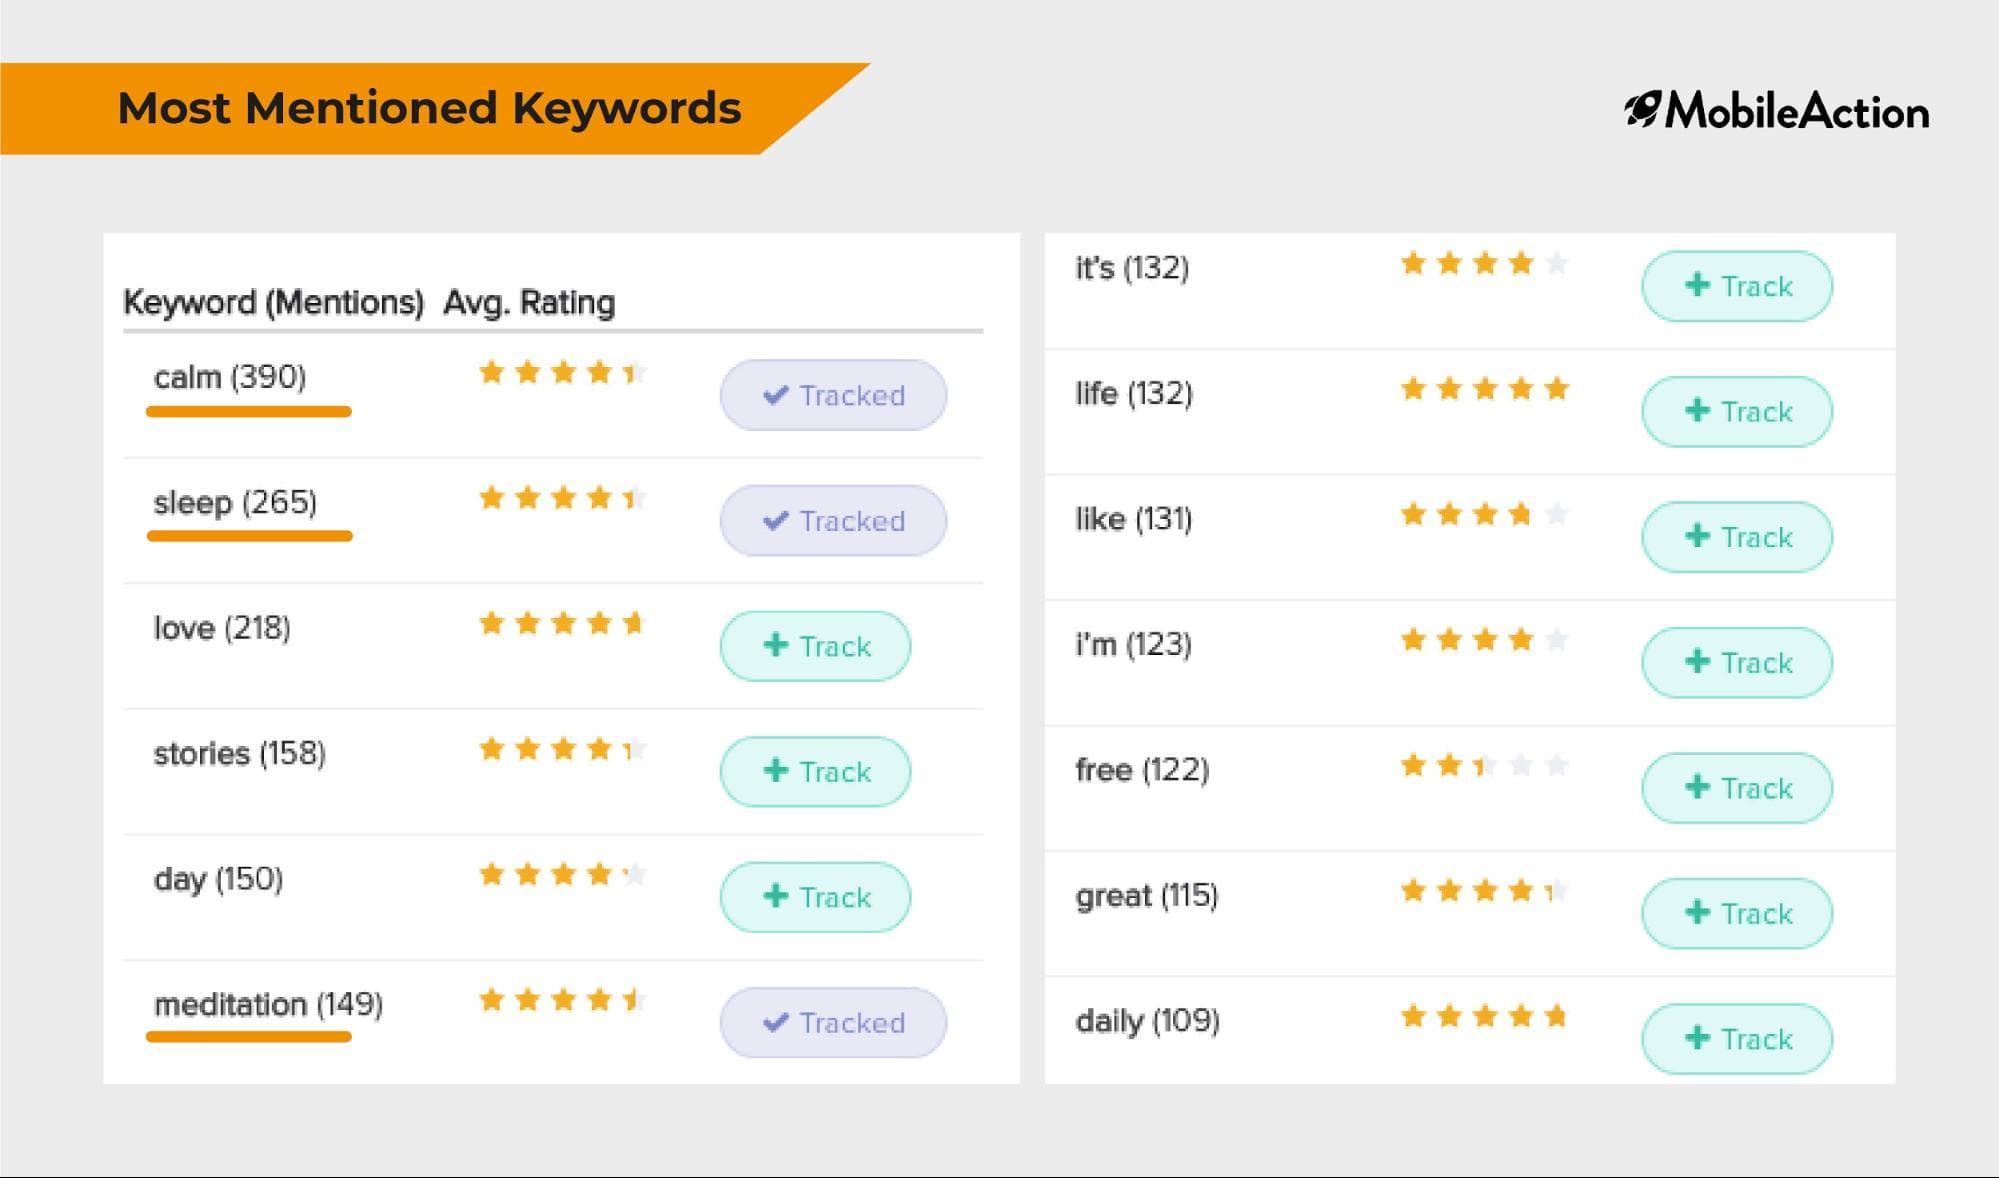 Most Mentioned Keywords in App Reviews